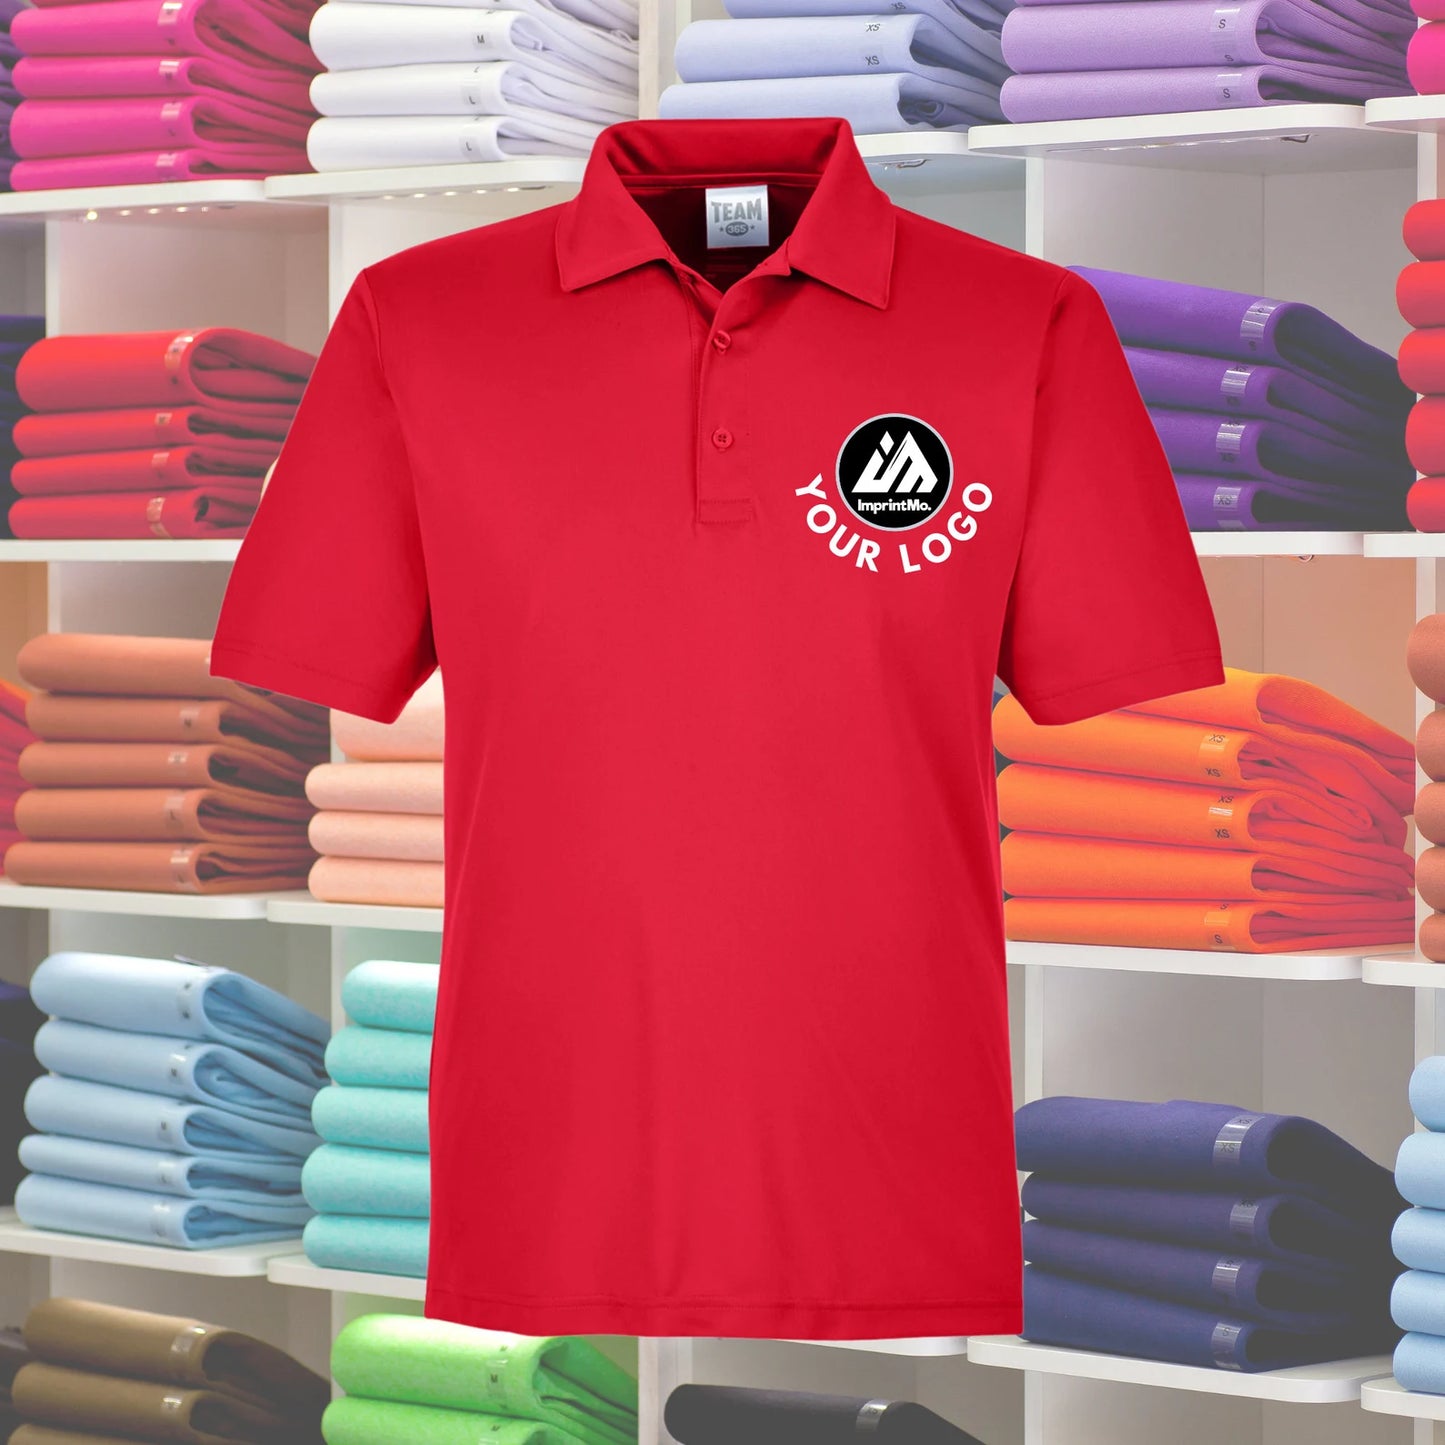 MENS Polo Shirts Full Color Custom Print - Performance Sport Shirt - Full Color Graphics - Sports Fabric - Moisture-Wicking Graphic Polos